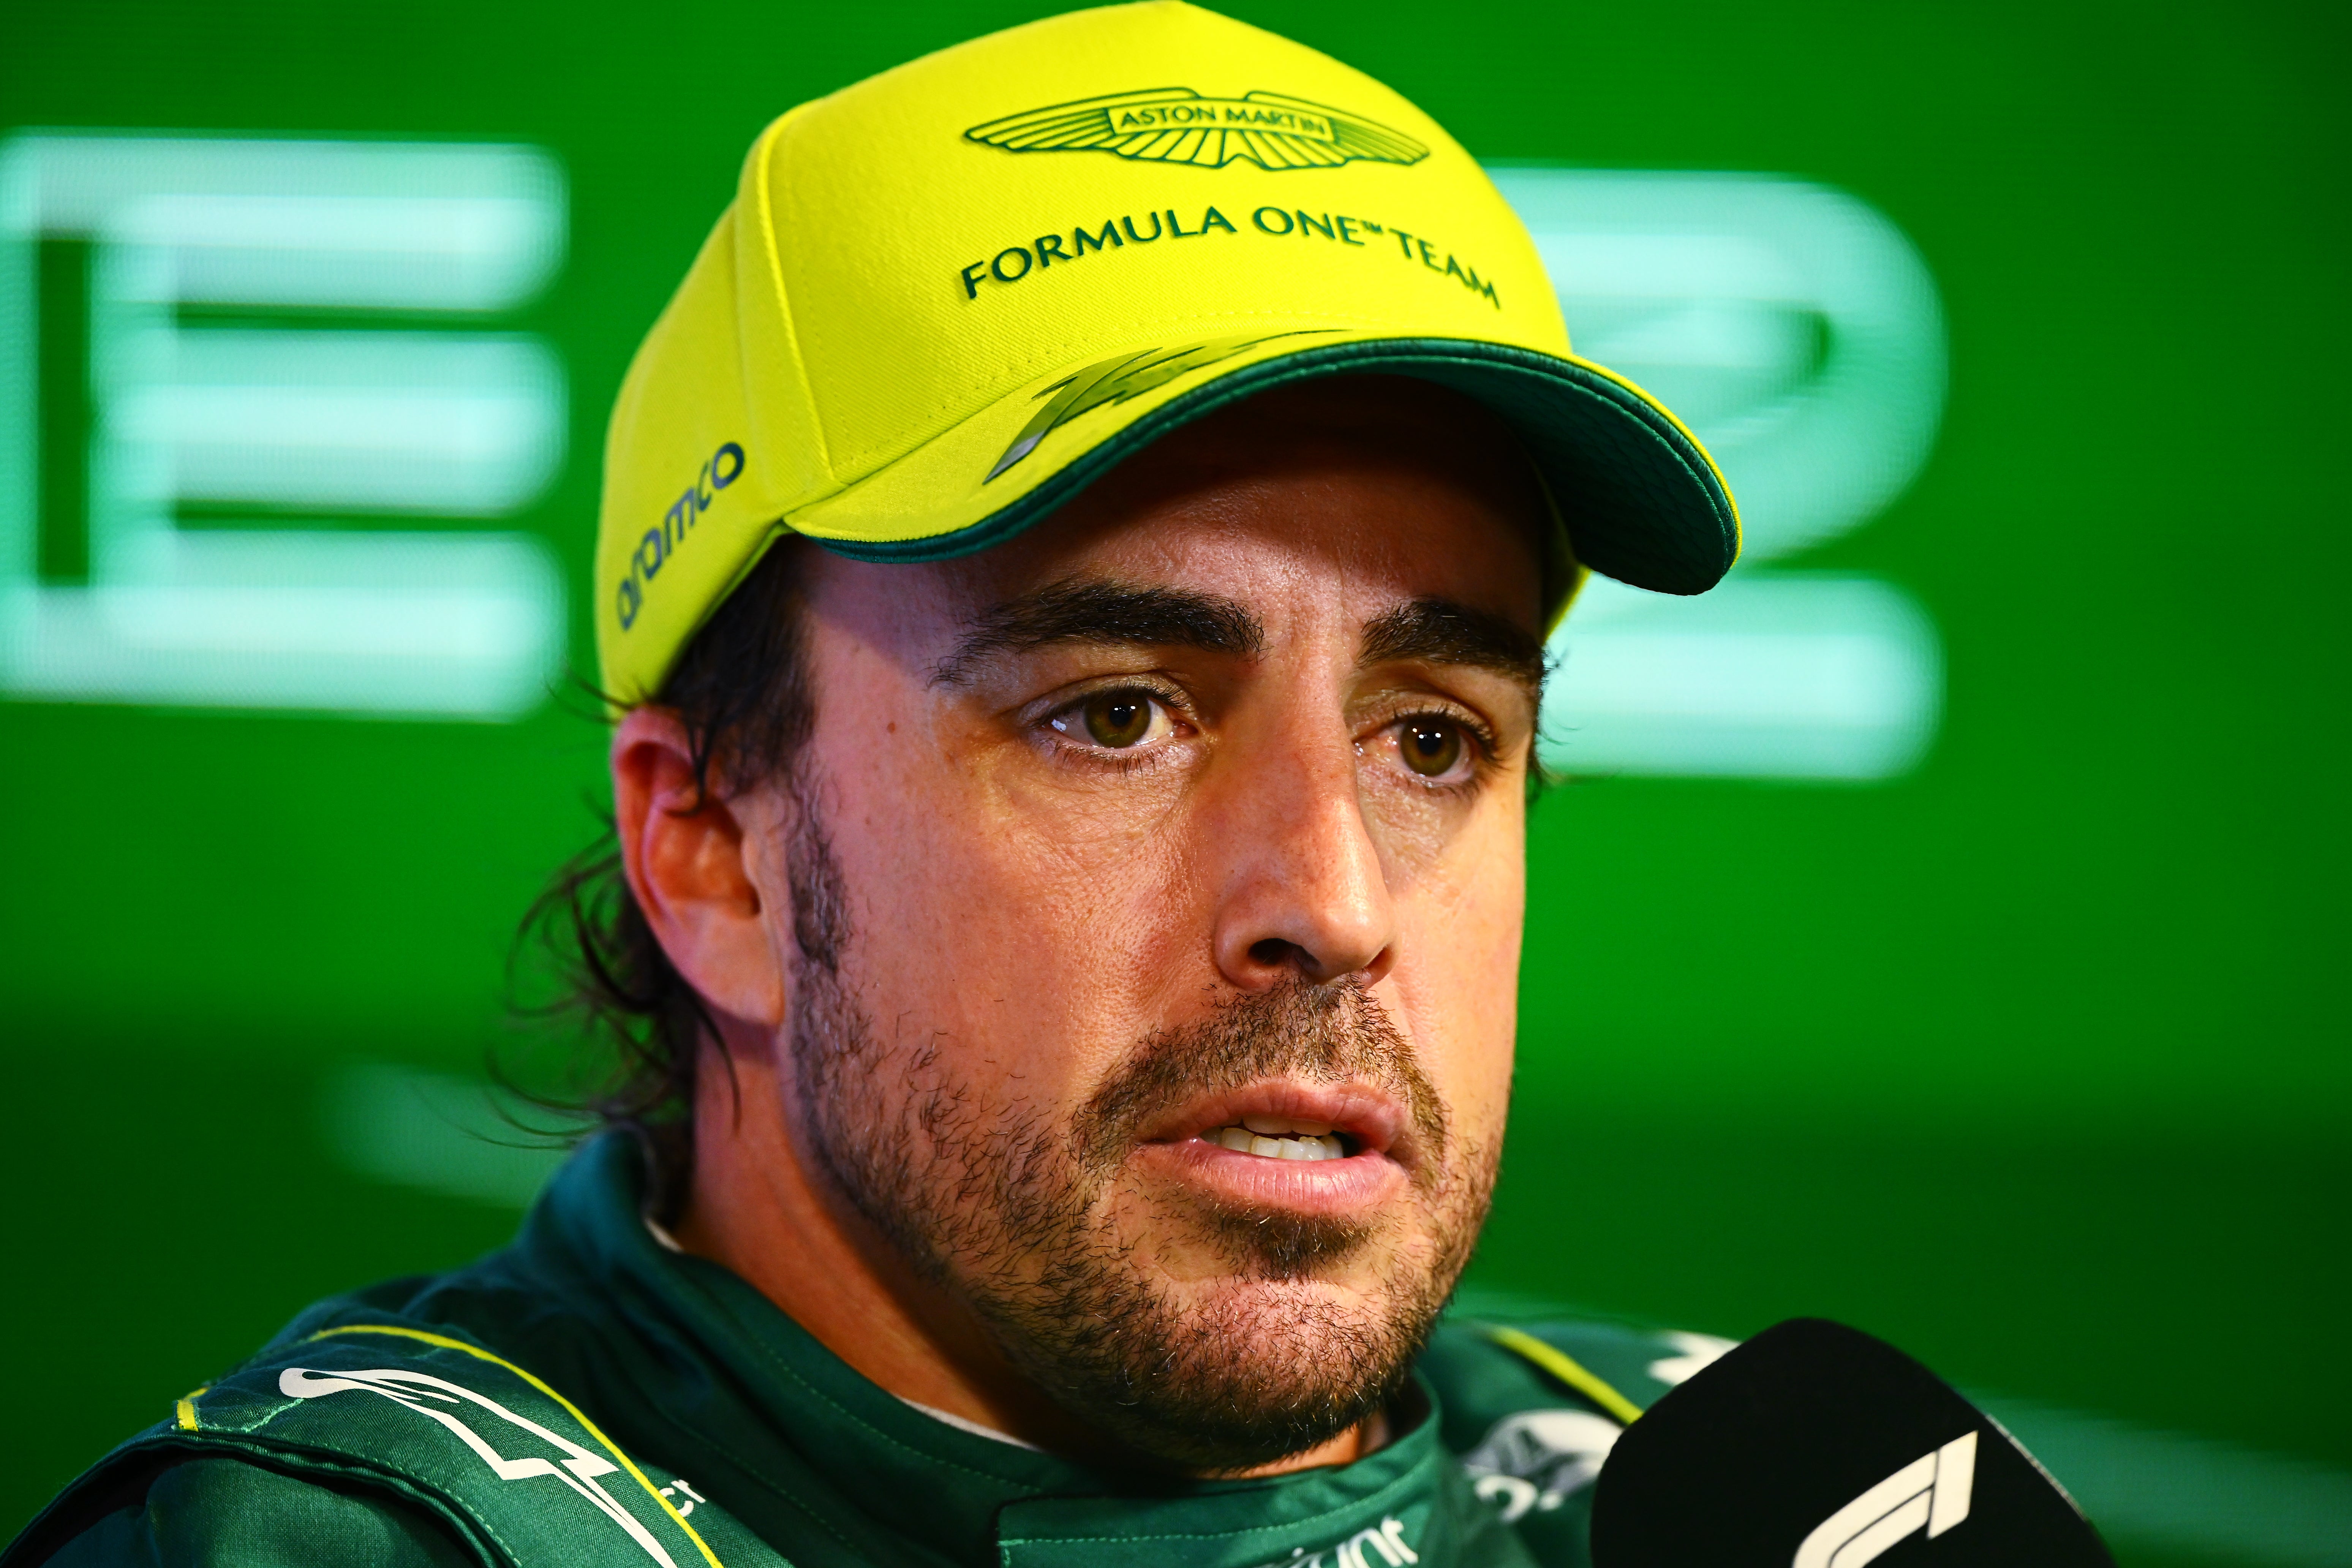 Fernando Alonso slammed the FIA after a penalty cost him his 100th podium in F1